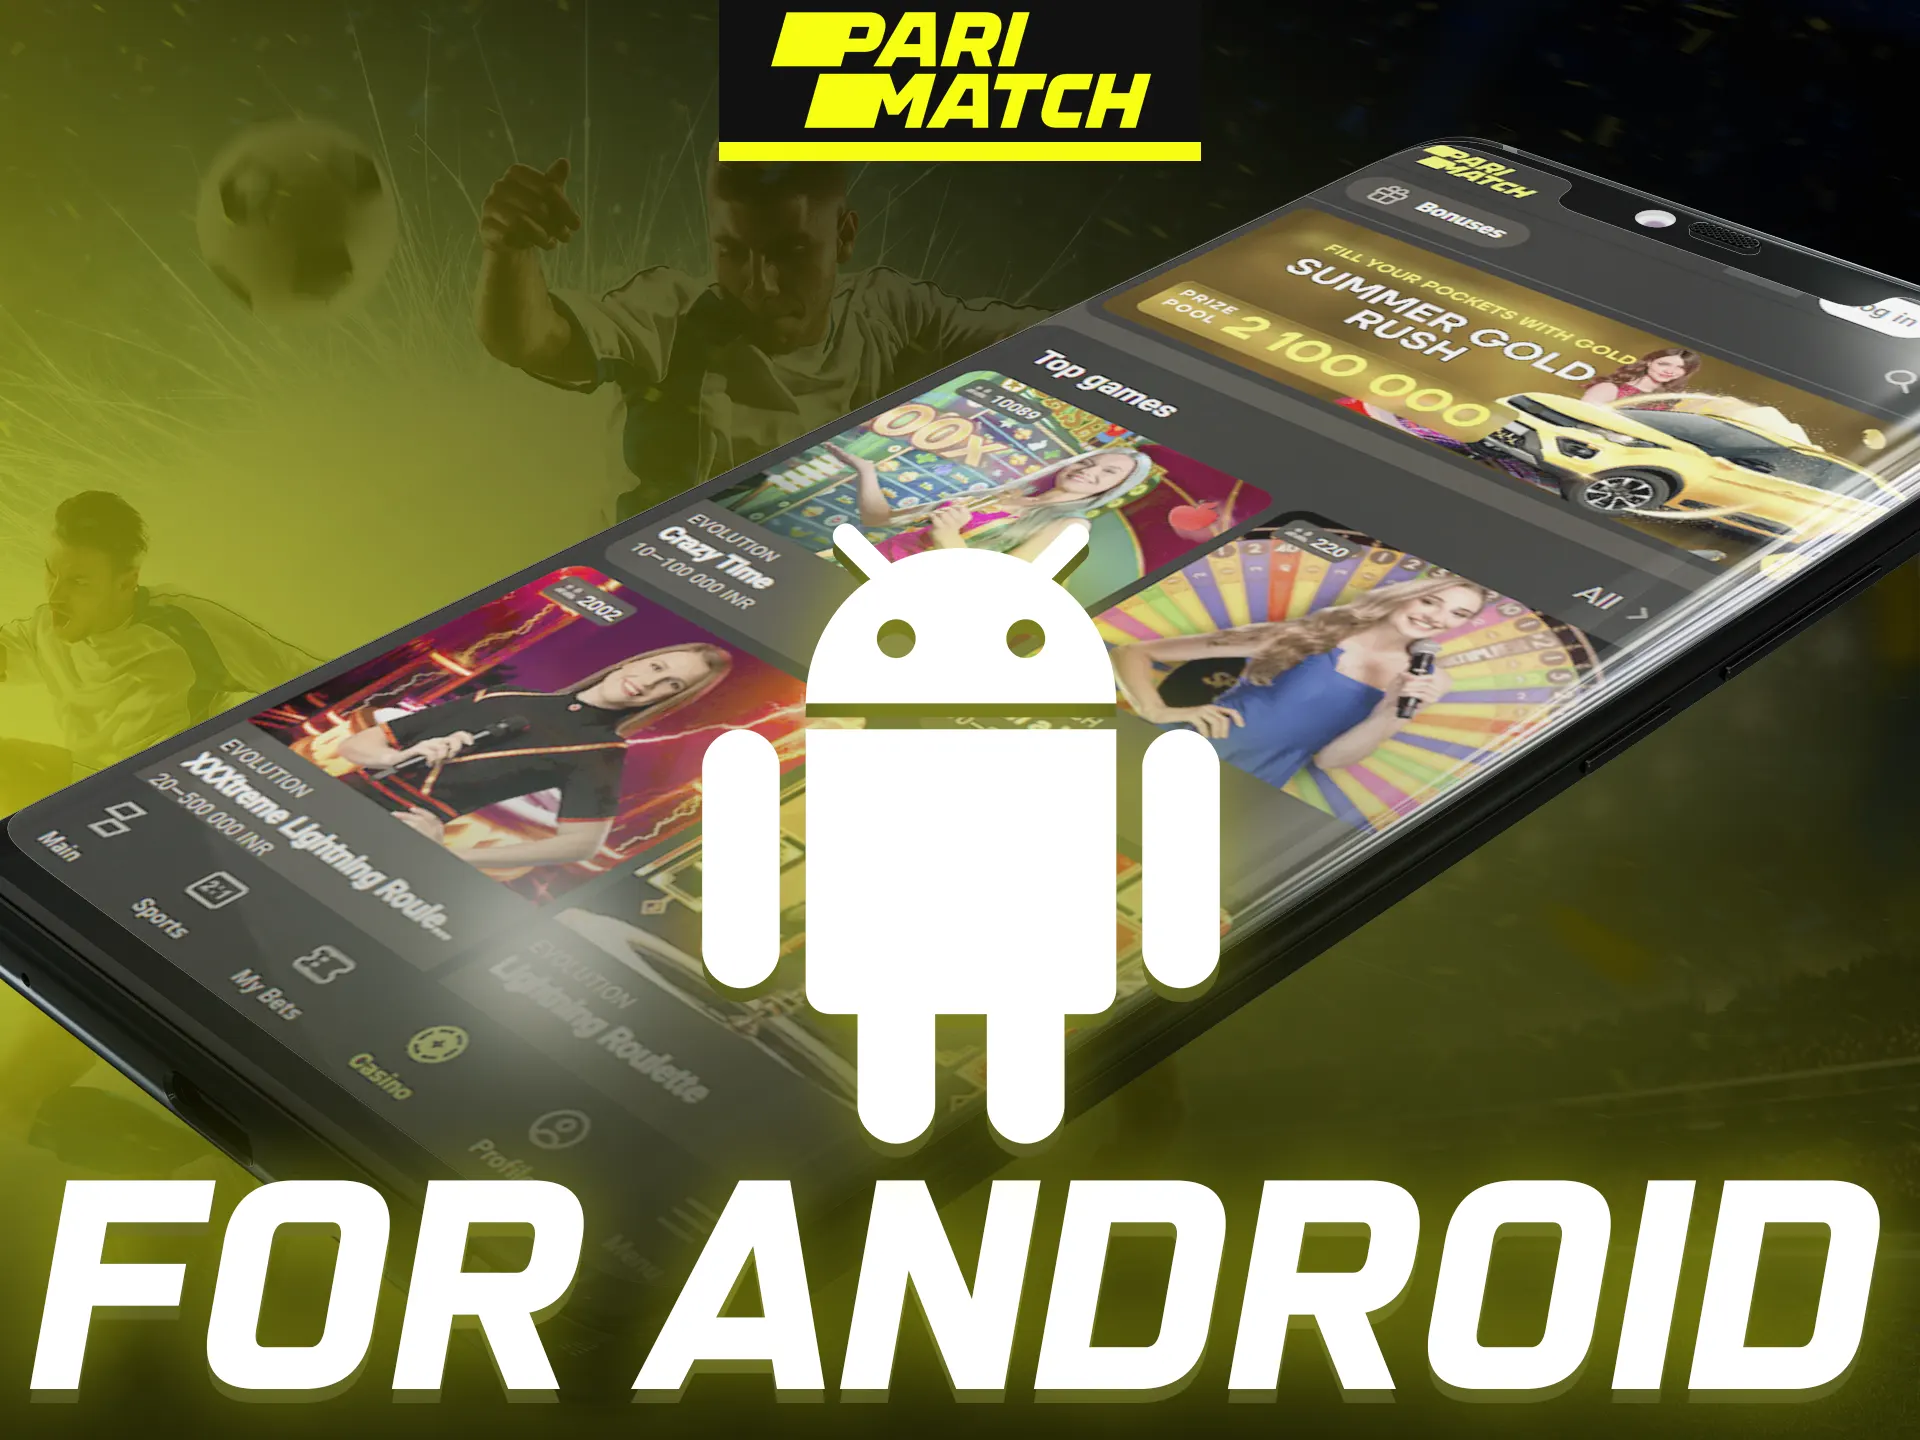 The Parimatch mobile betting application is available for Android devices.